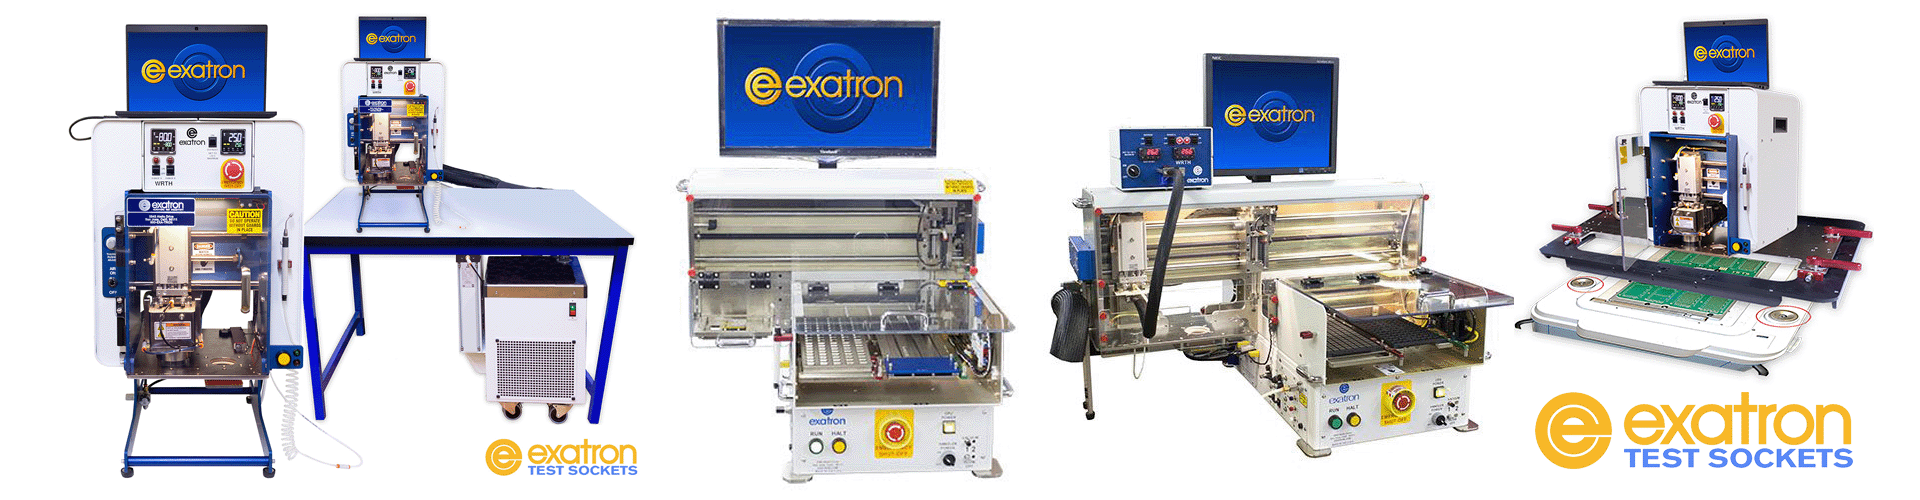 Desktop handlers semi-manual and ATE automated test systems, thermal temperature forcing units